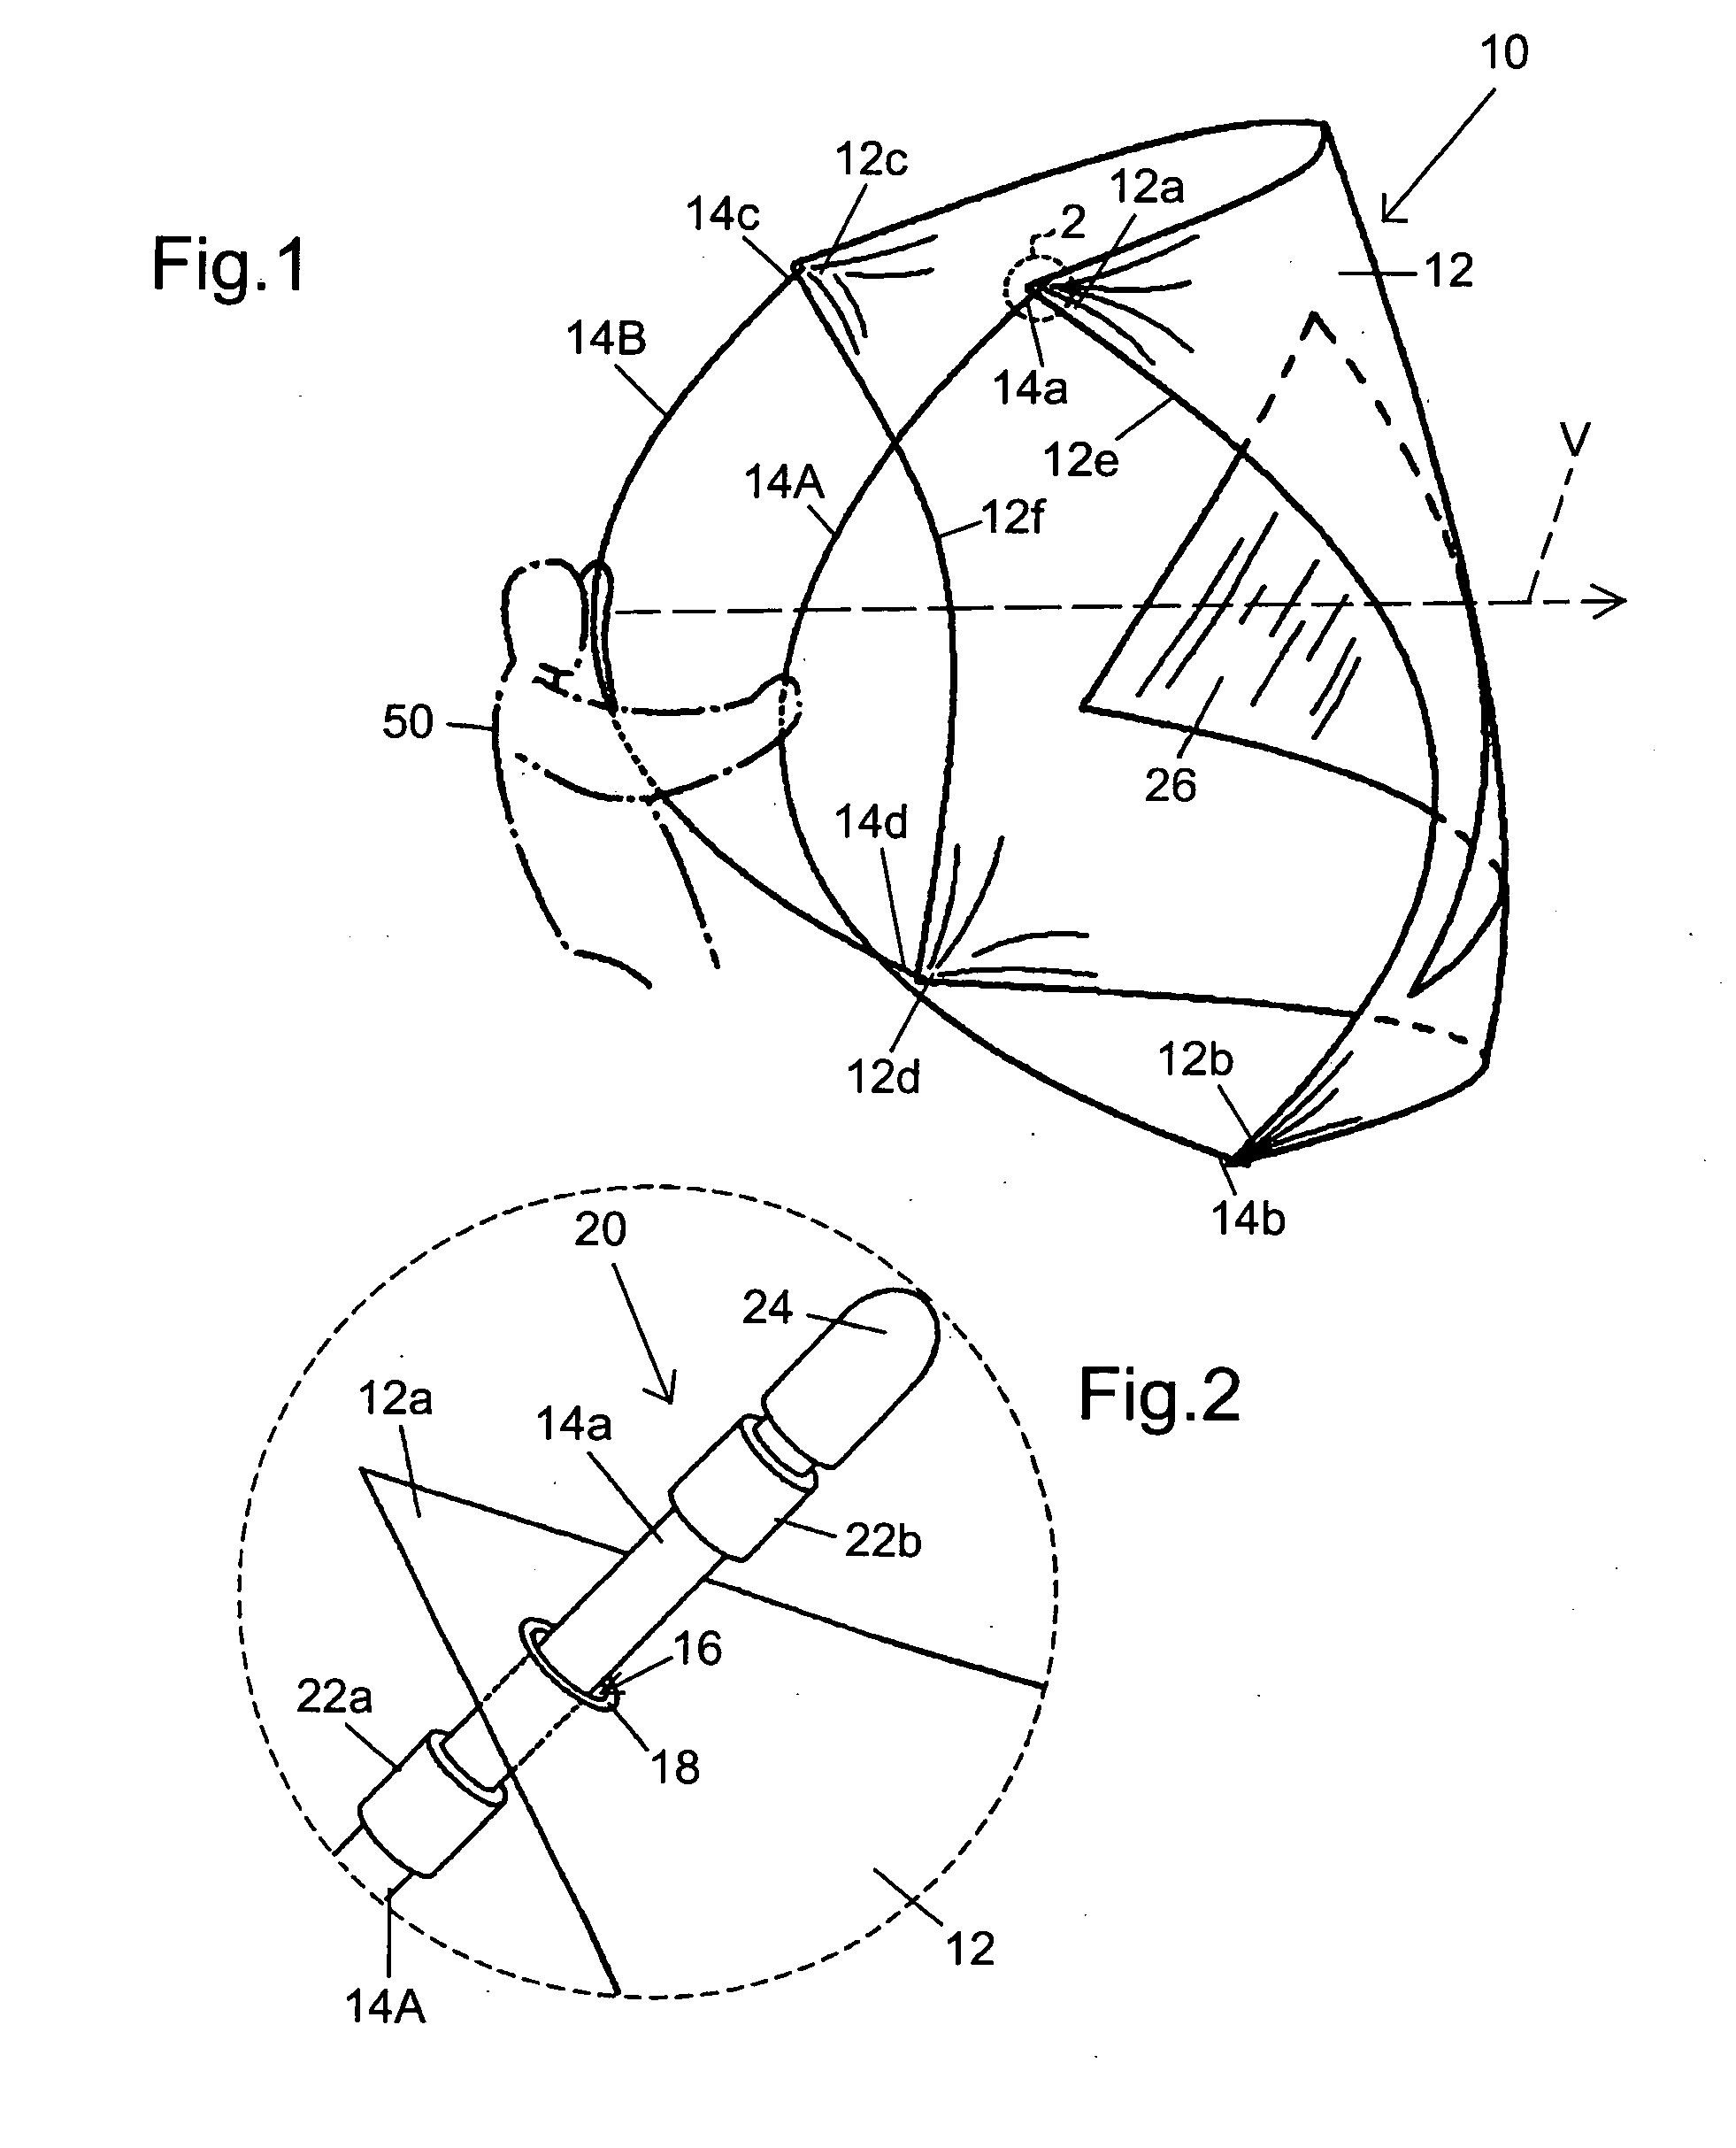 Personal sail assembly and method for use in conjunction with a mobile device